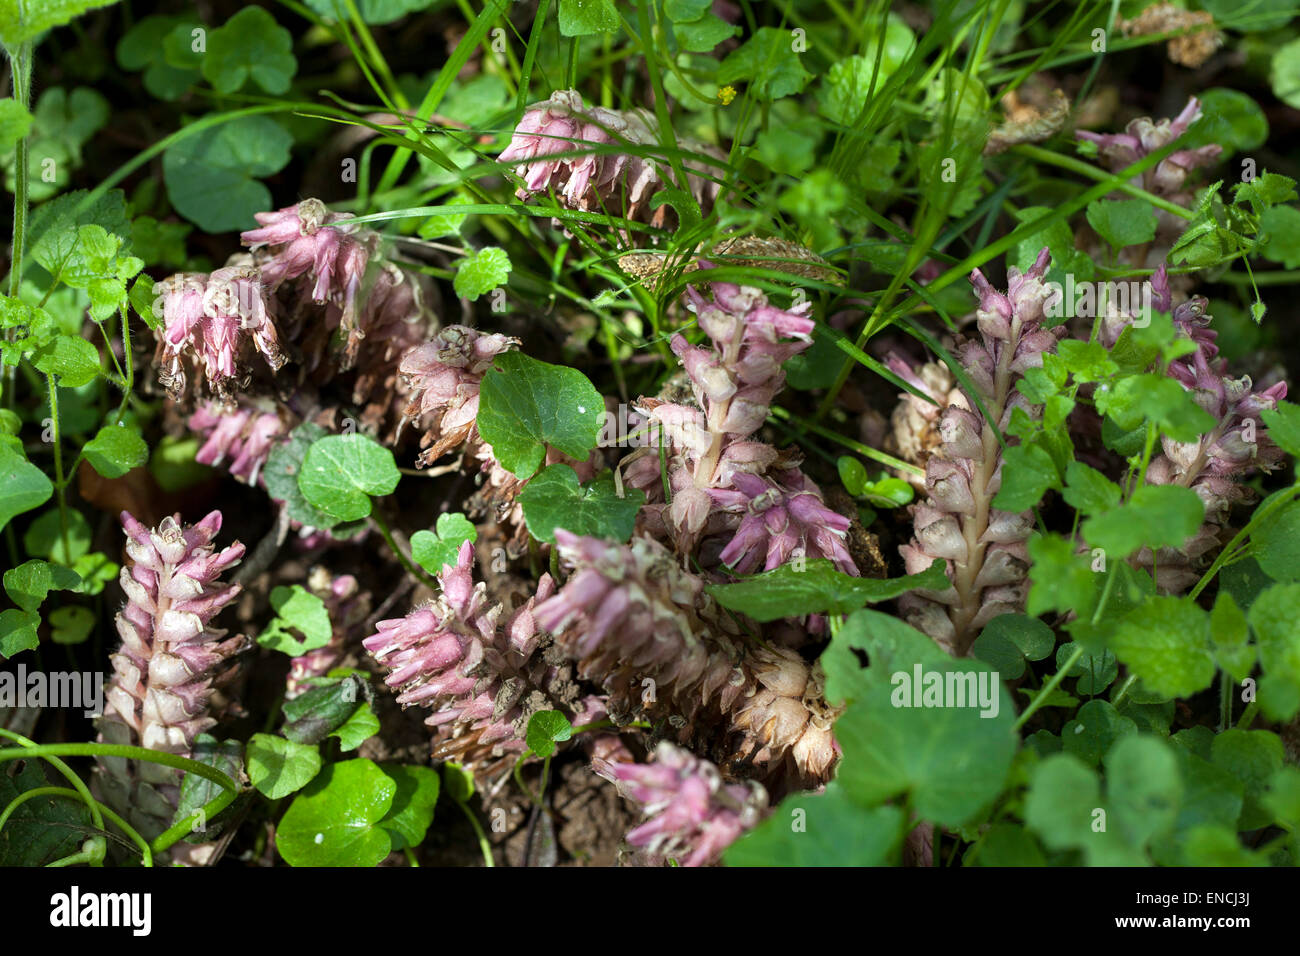 Toothwort, Lathraea squamaria blooming plant - parasite, parasitic on the roots of deciduous trees Europe widespread chlorophyll is missing Stock Photo